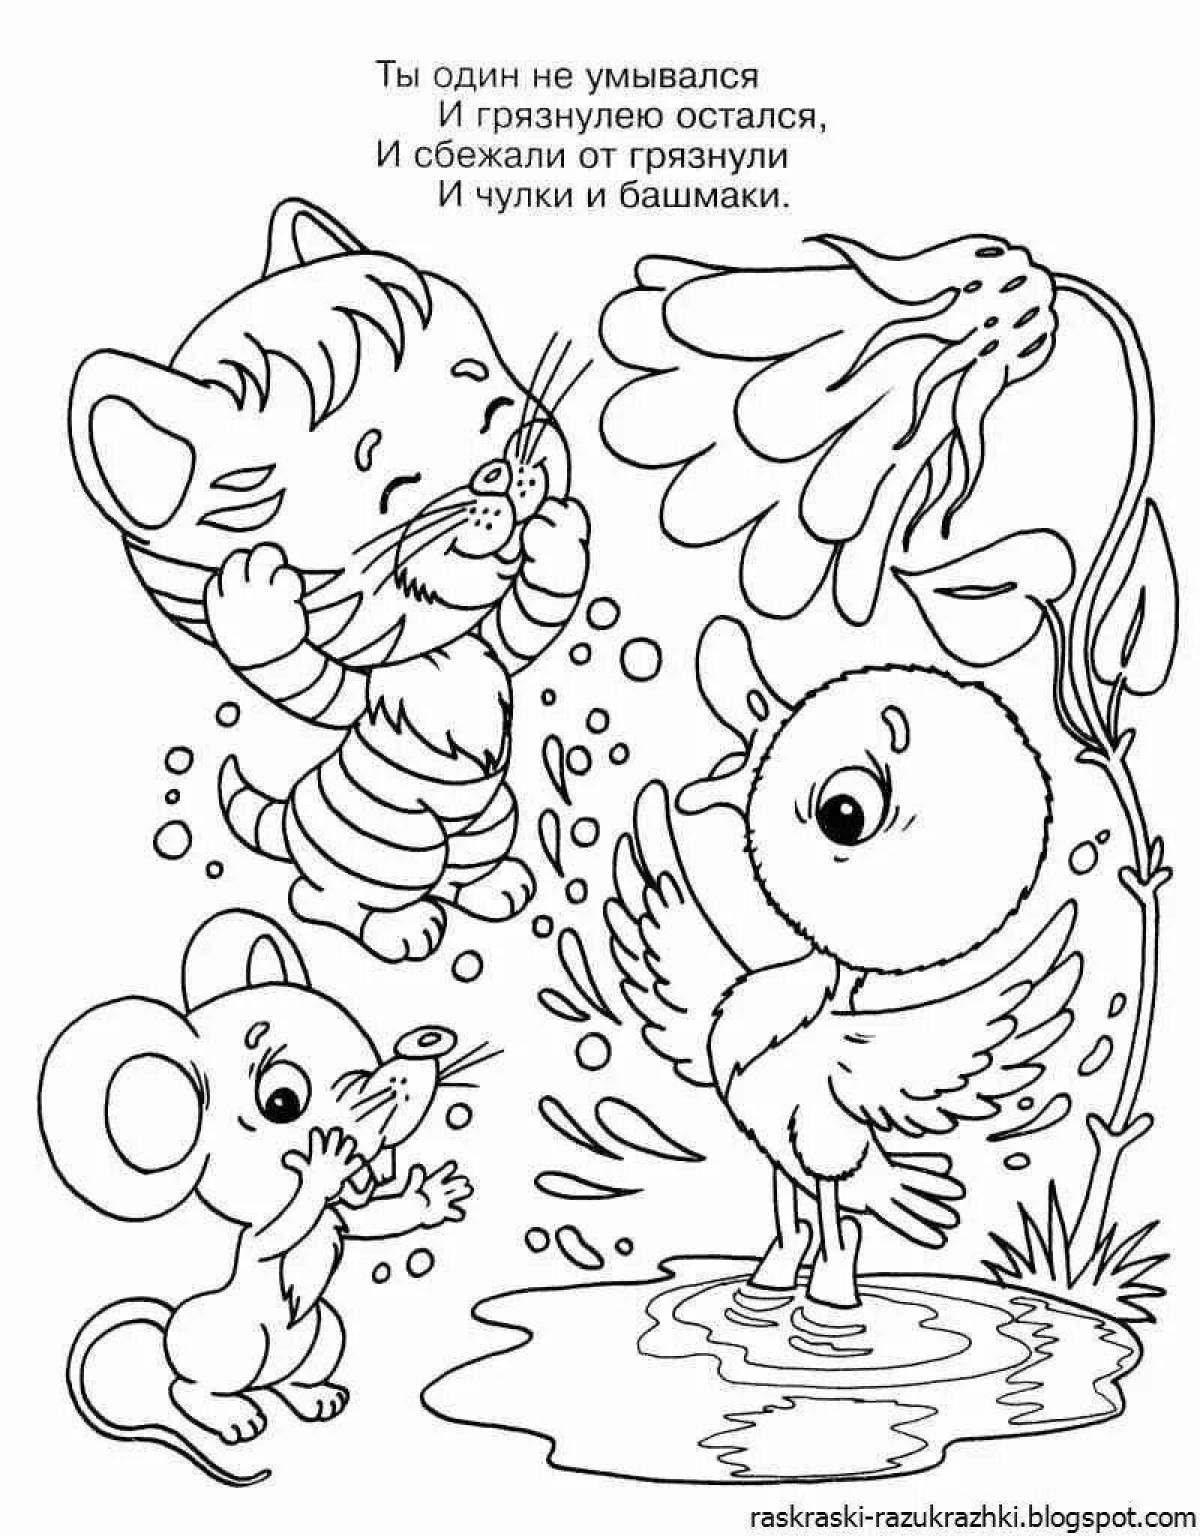 Colorful confusion coloring page